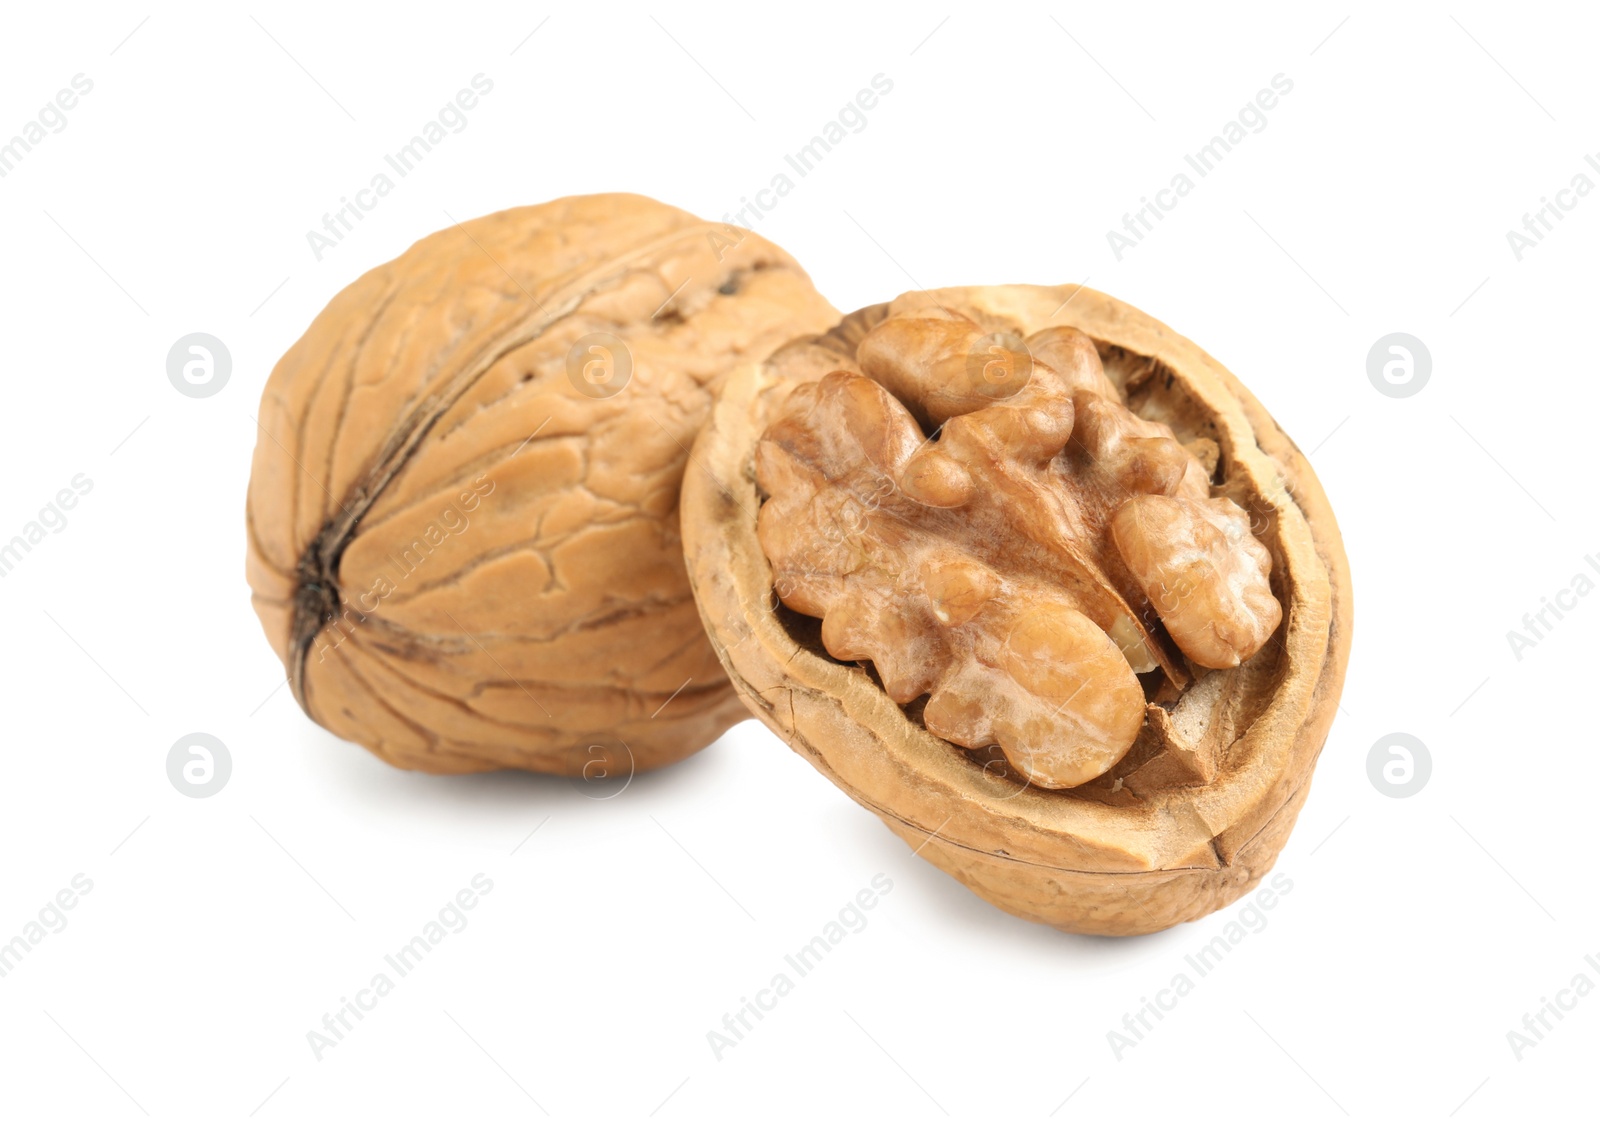 Photo of Fresh ripe walnuts in shell on white background